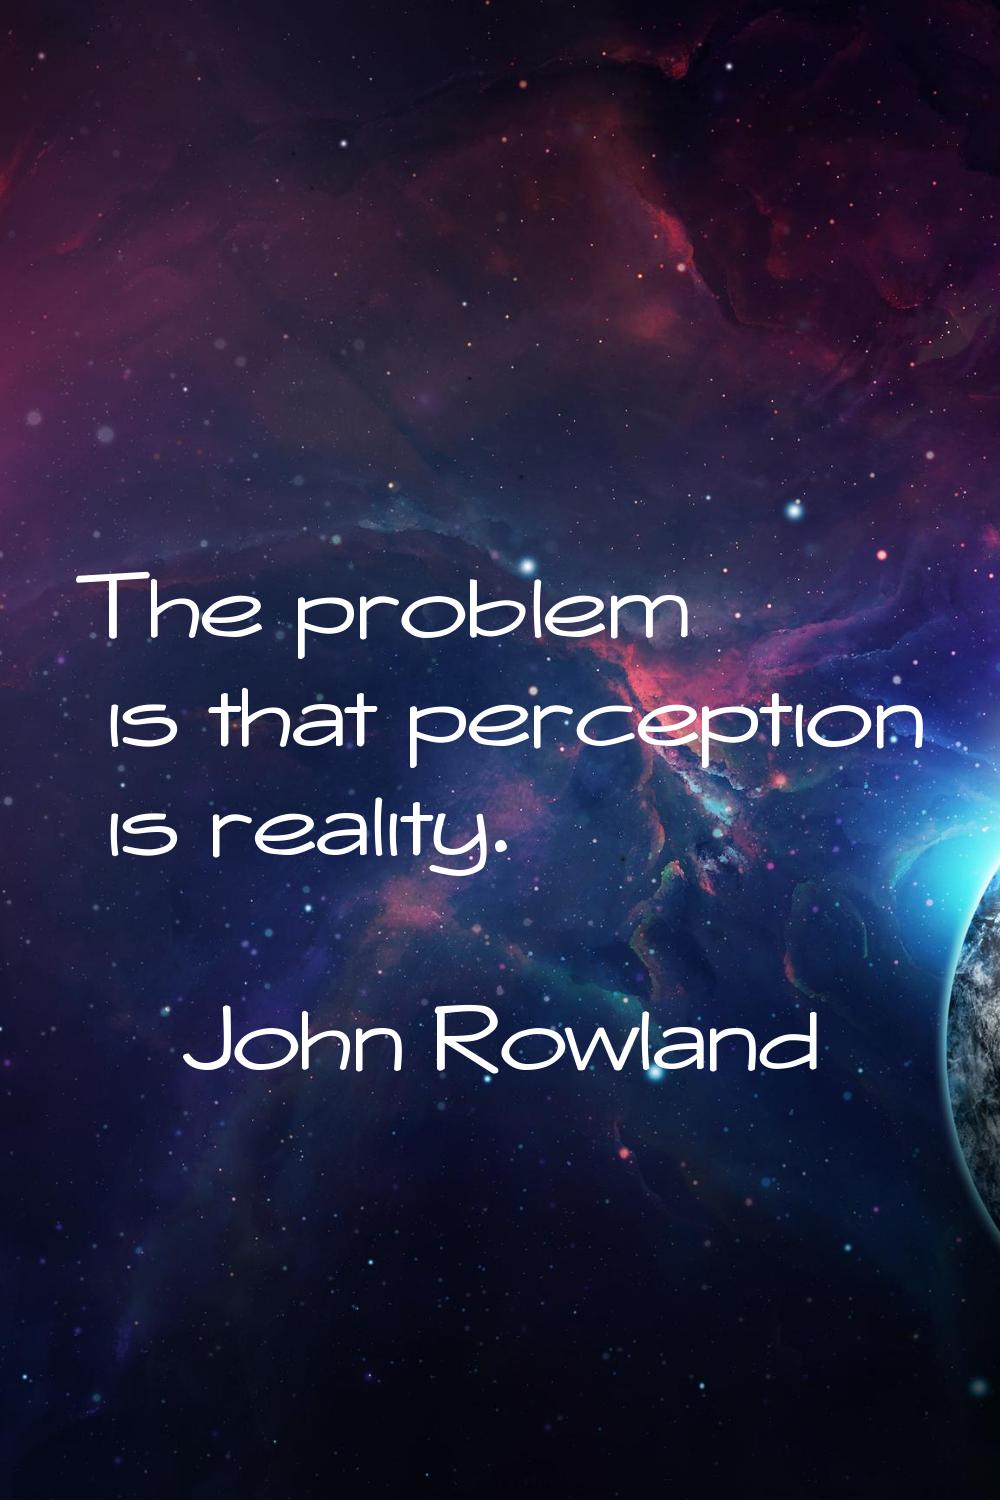 The problem is that perception is reality.